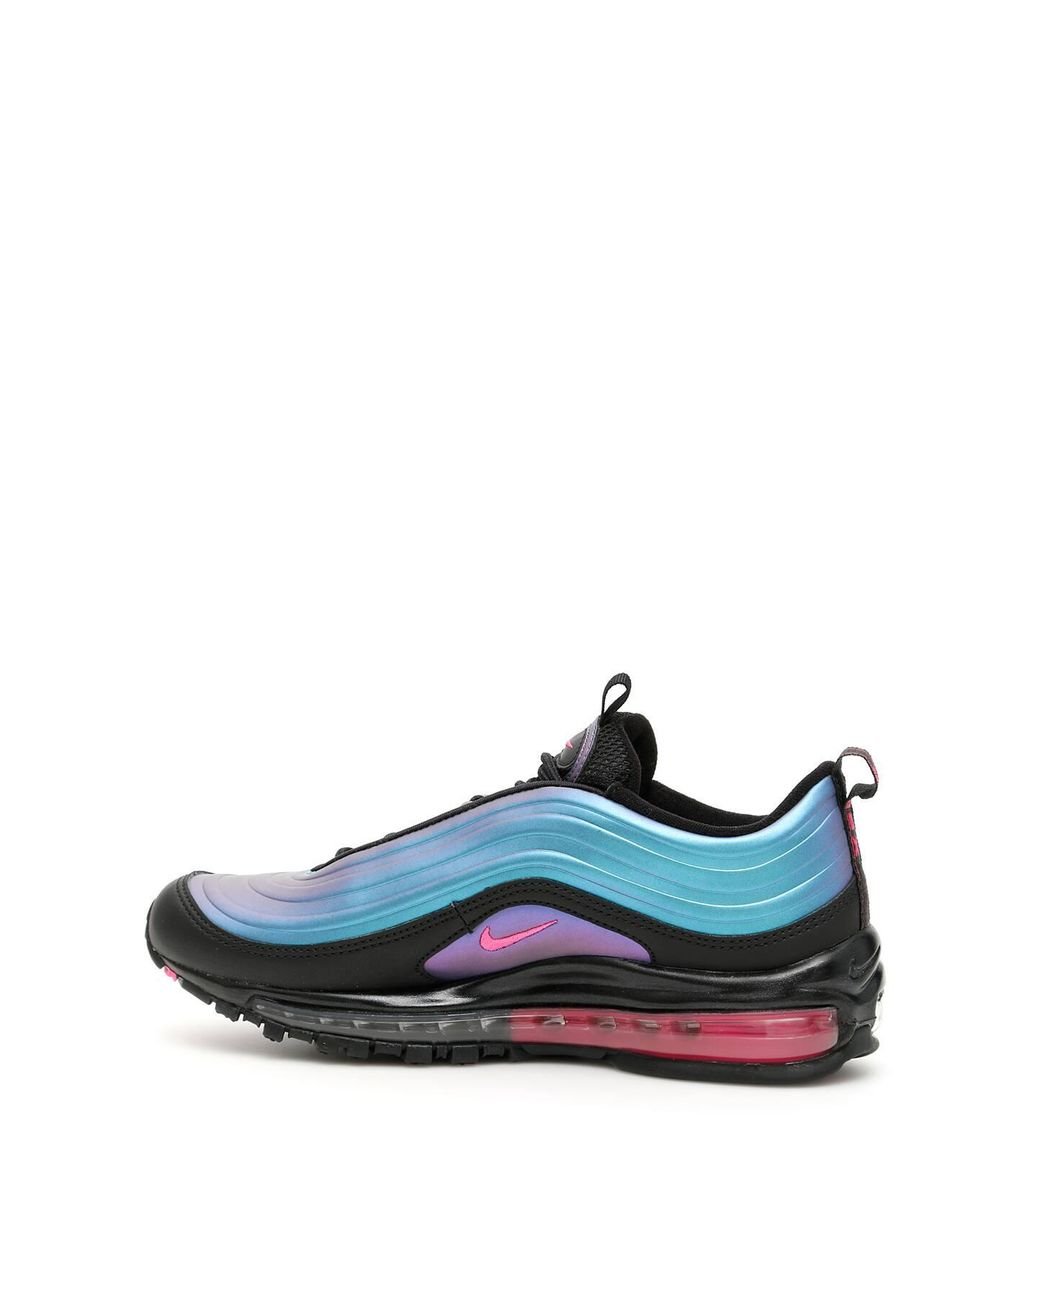 Nike Air Max 97 Lx Sneakers in Black,Purple,Light Blue (Blue) for Men | Lyst